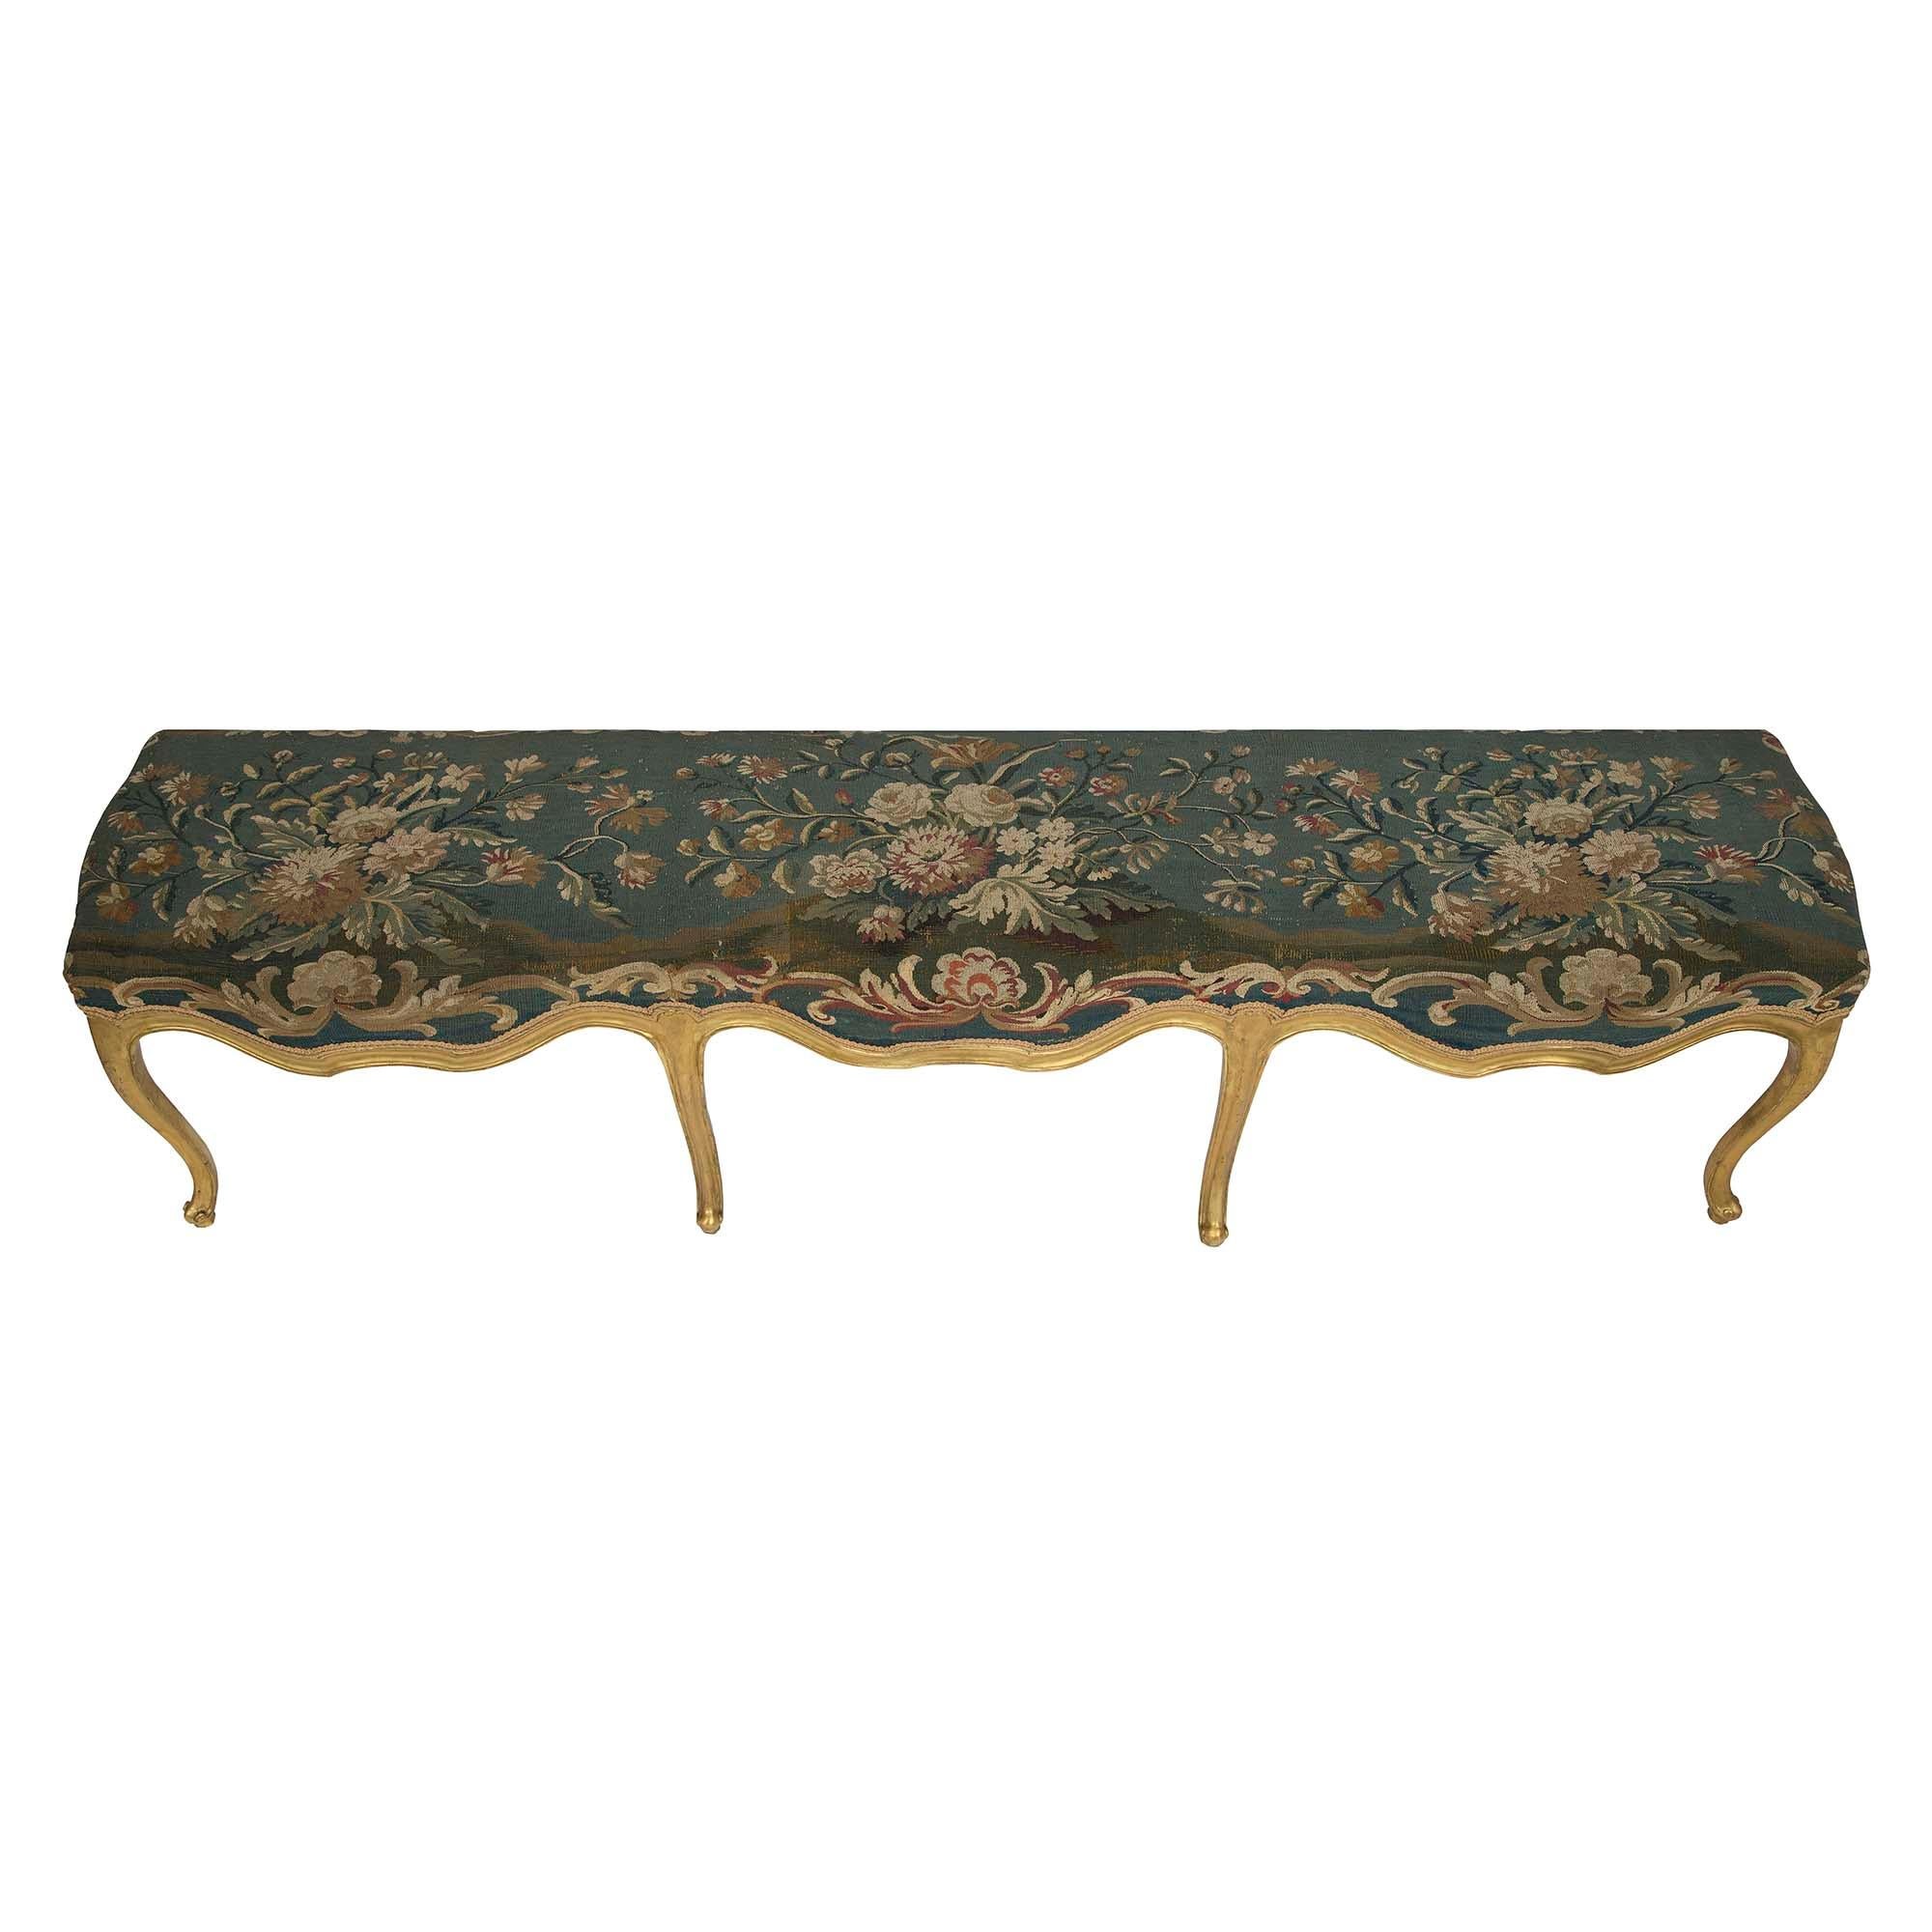 A most attractive and unusually wide French 18th century Louis XV period giltwood and Aubusson tapestry eight legged bench. The bench is elegantly raised by elongated 'S' scrolled cabriole legs. The apron has a very elegant arbalest shape on the